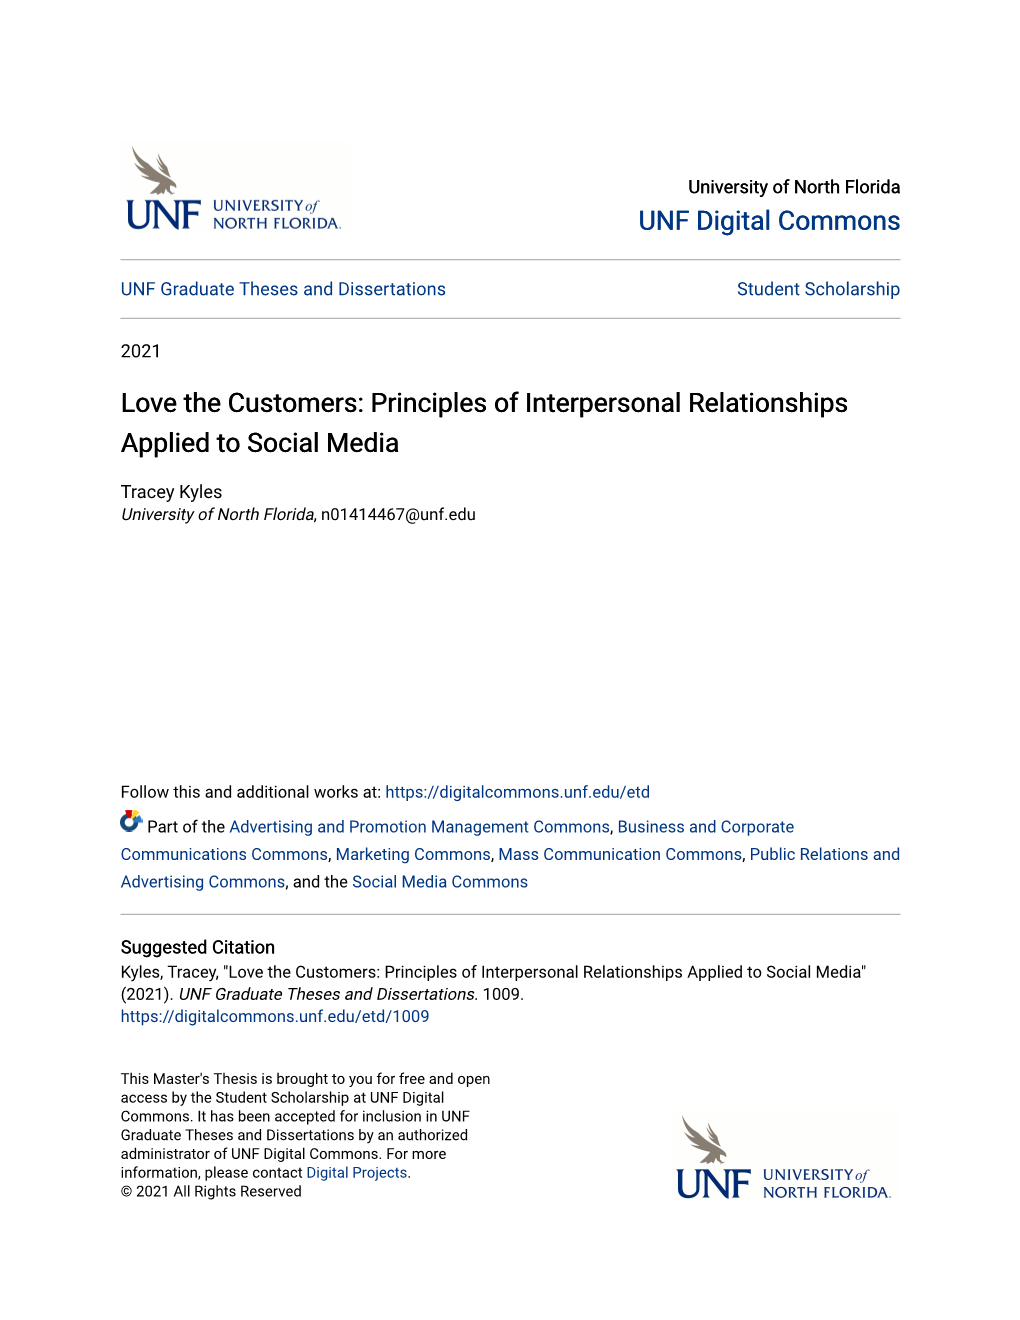 Principles of Interpersonal Relationships Applied to Social Media